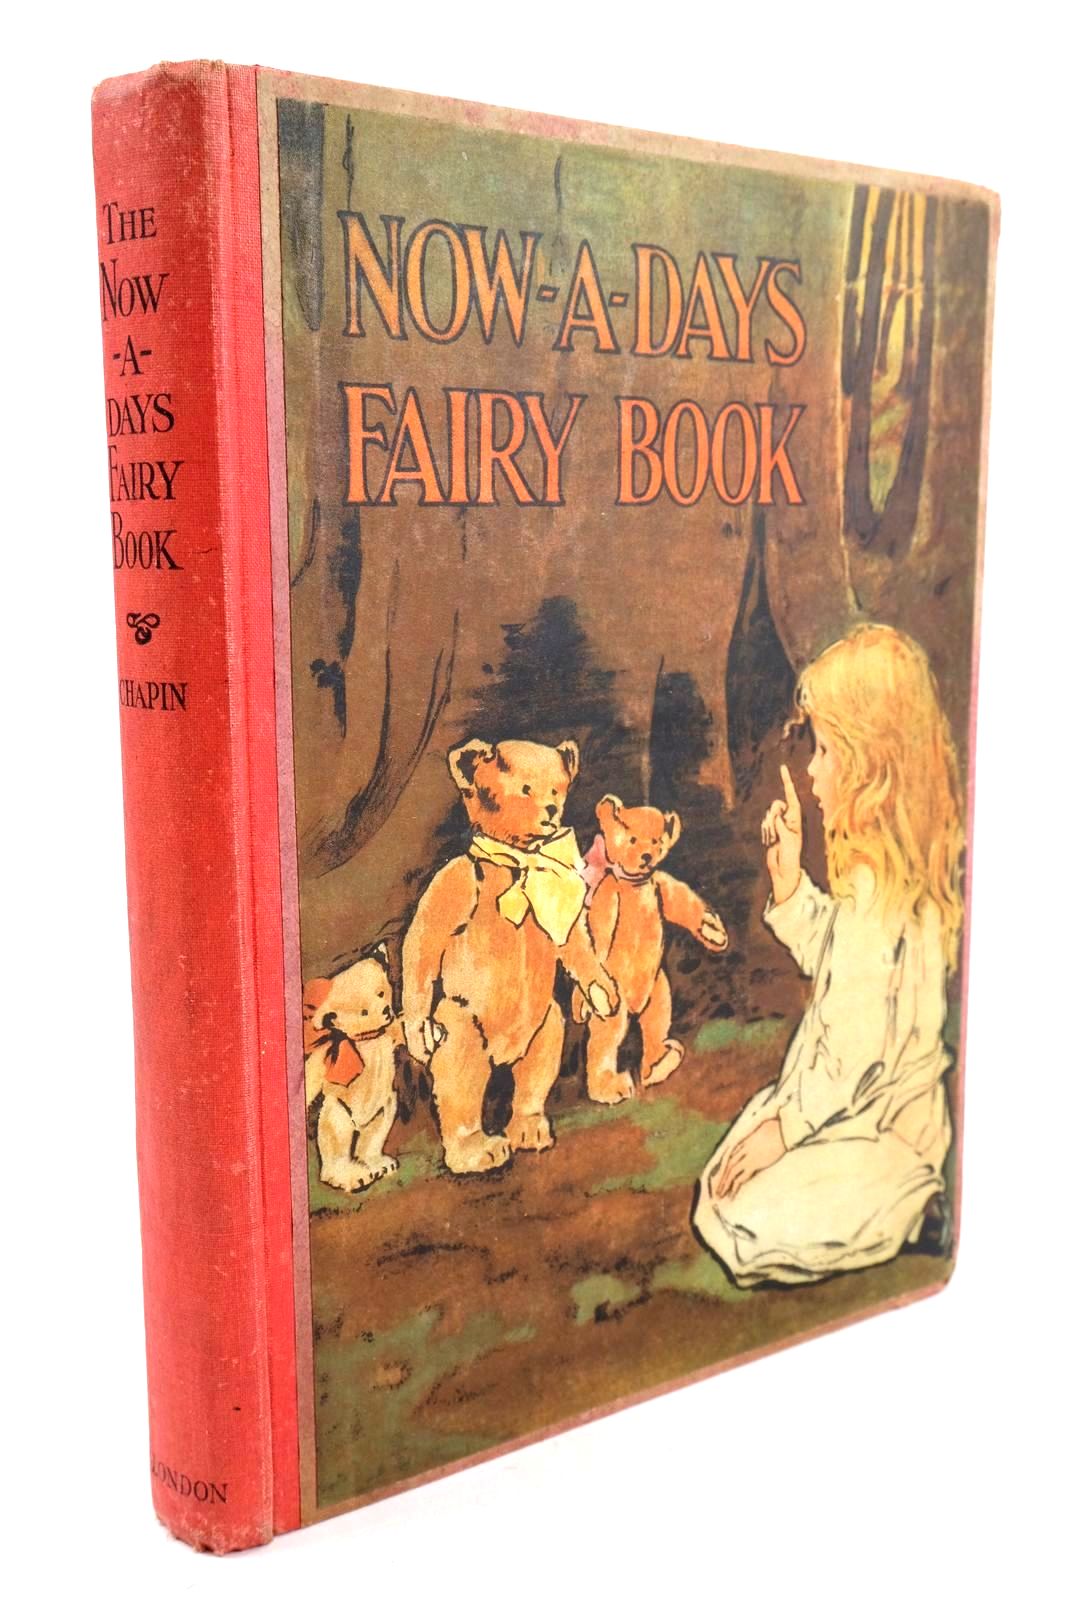 Photo of THE NOW-A-DAYS FAIRY BOOK written by Chapin, Anna Alice illustrated by Smith, Jessie Willcox published by J. Coker & Co. (STOCK CODE: 1324229)  for sale by Stella & Rose's Books